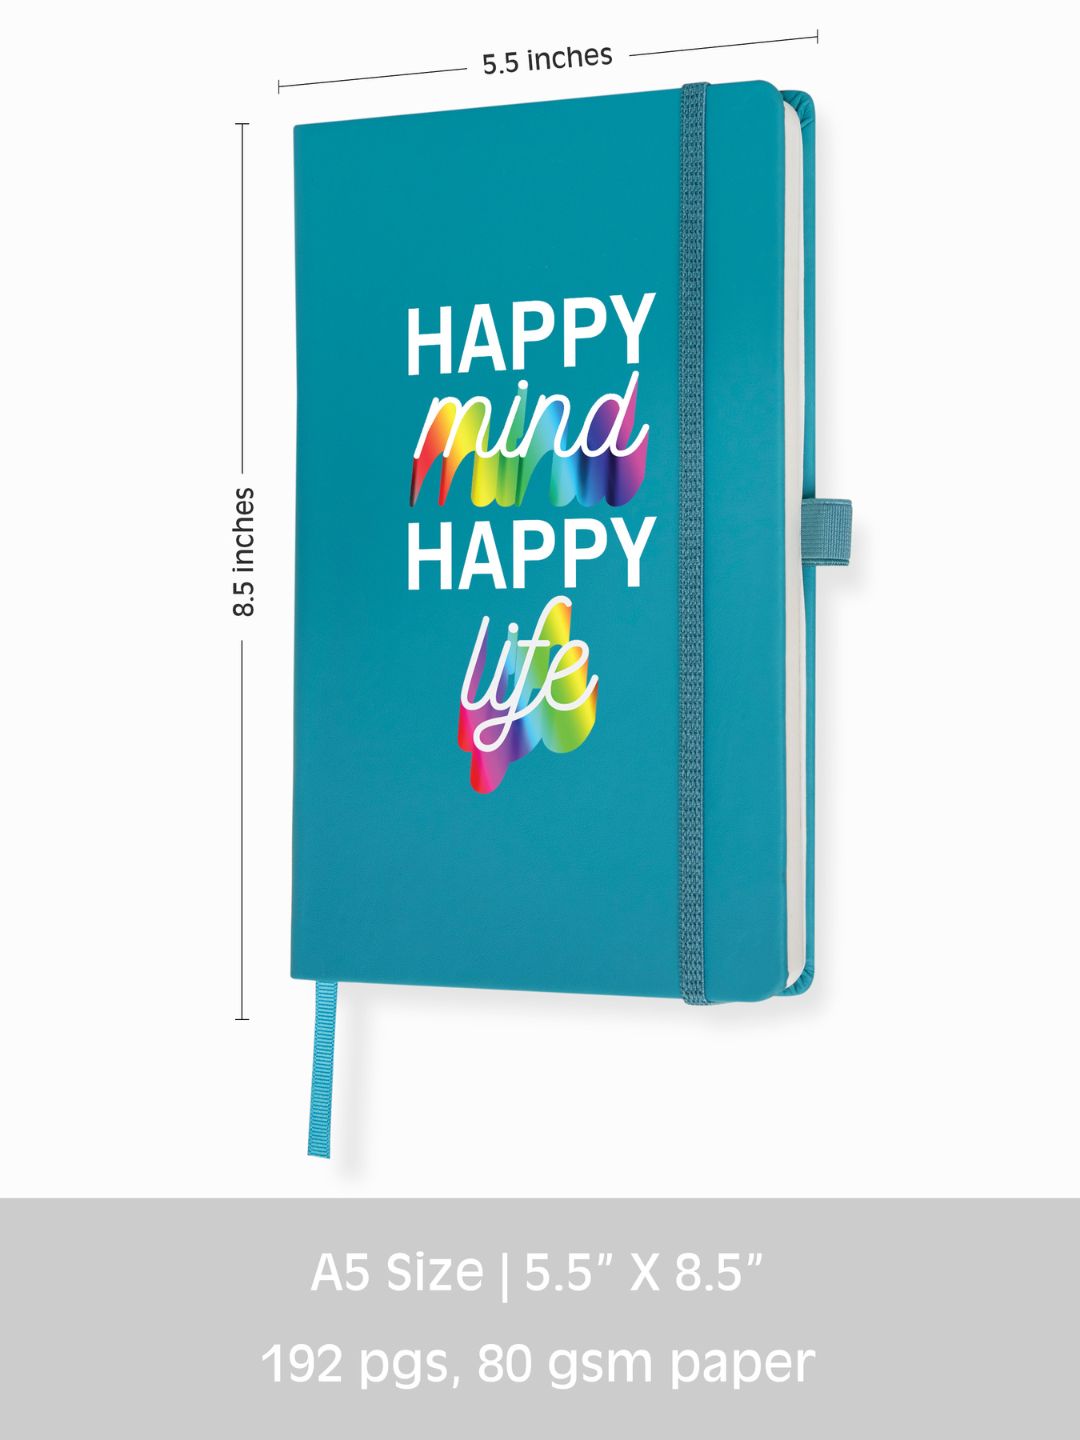 Pro Series Executive A5 PU Leather Hardbound Ruled Turkish Blue Notebook with Pen Loop [Happy Mind Happy Life]